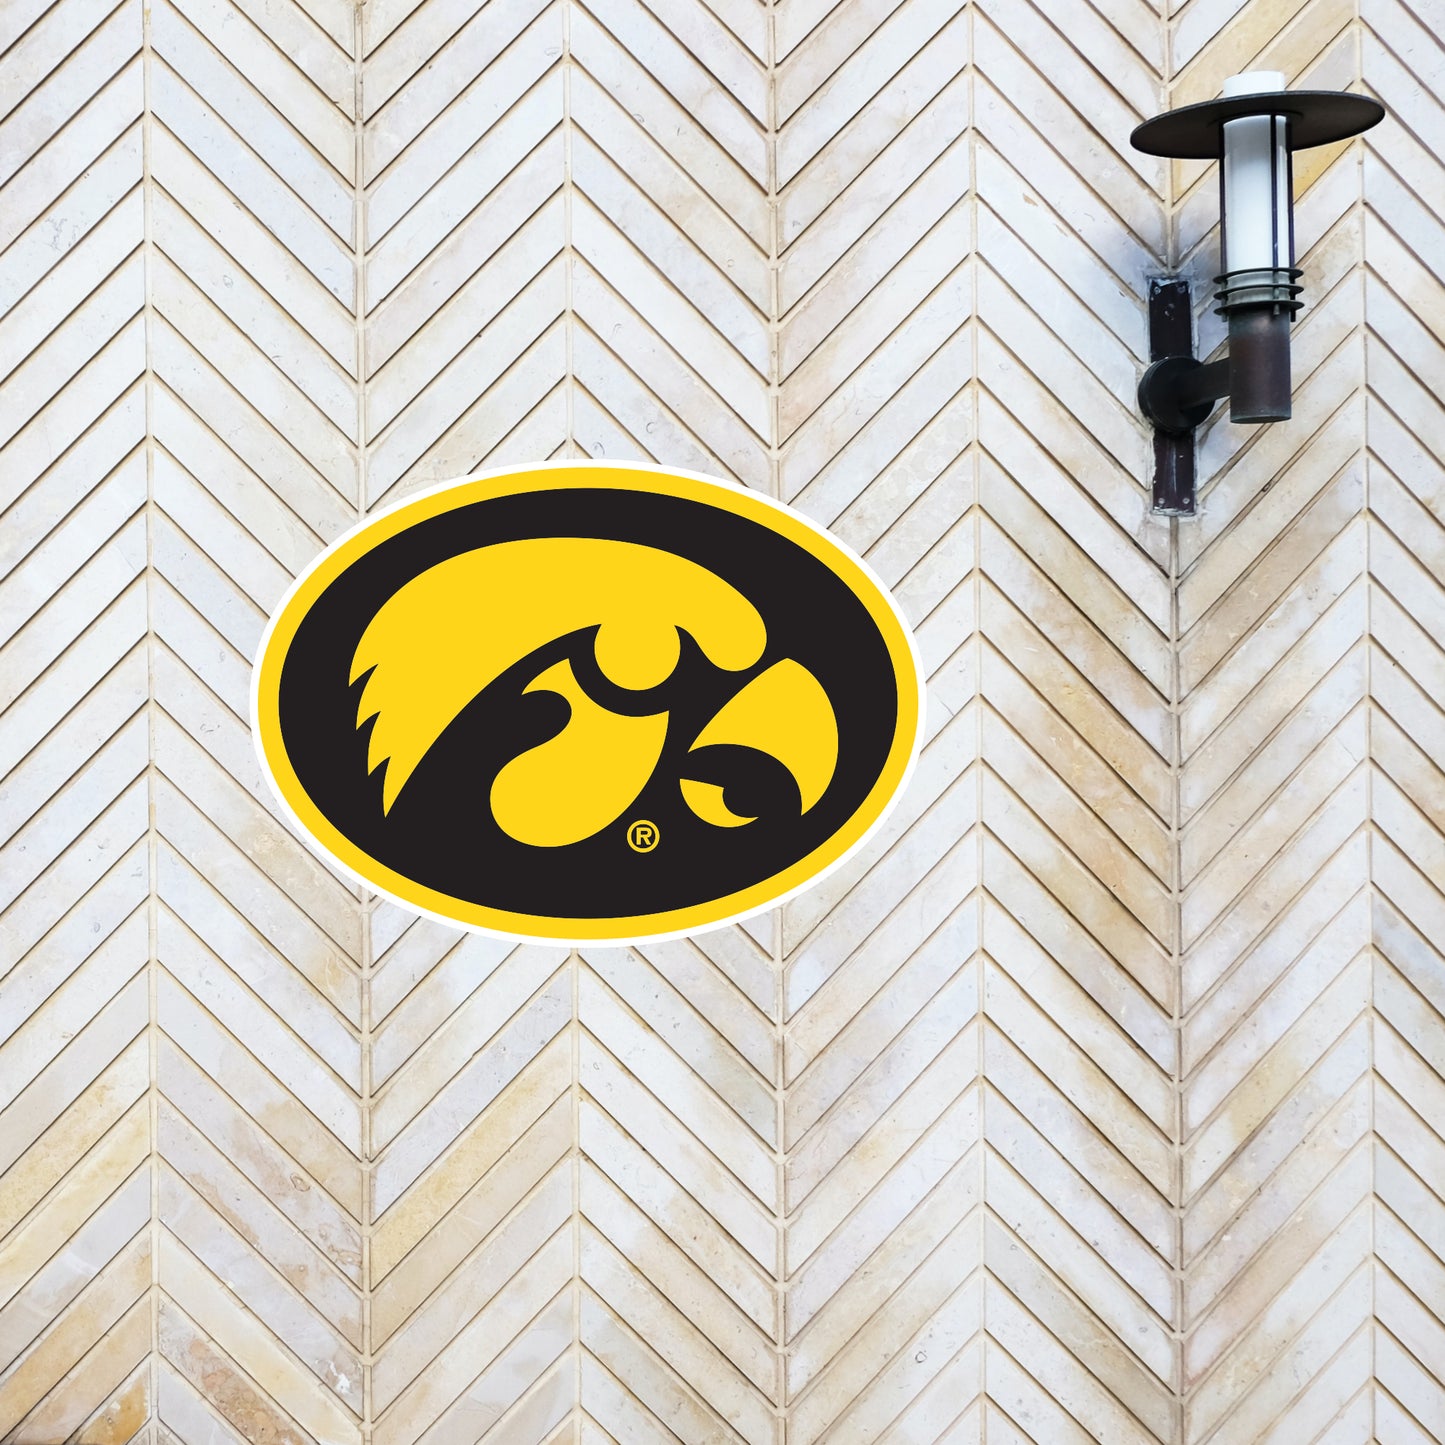 Iowa Hawkeyes: Outdoor Logo - Officially Licensed NCAA Outdoor Graphic –  Fathead